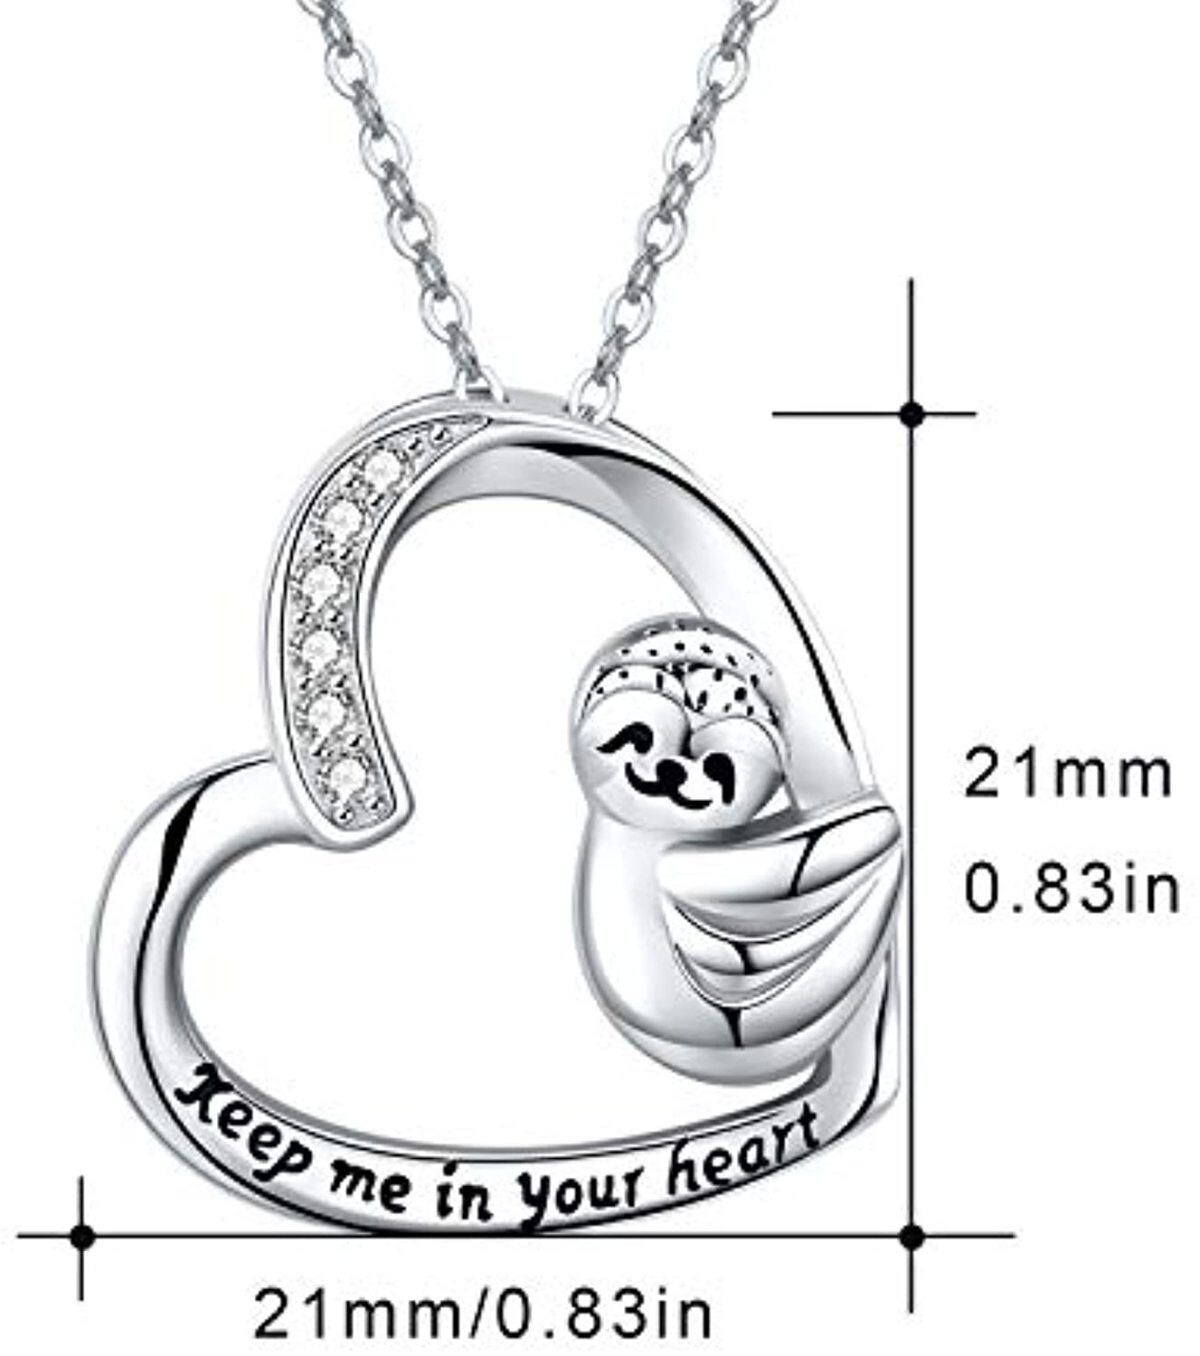 Sterling Silver Cubic Zirconia Sloth Heart Pendant Necklace Engraved Keep Me in Your Heart-6